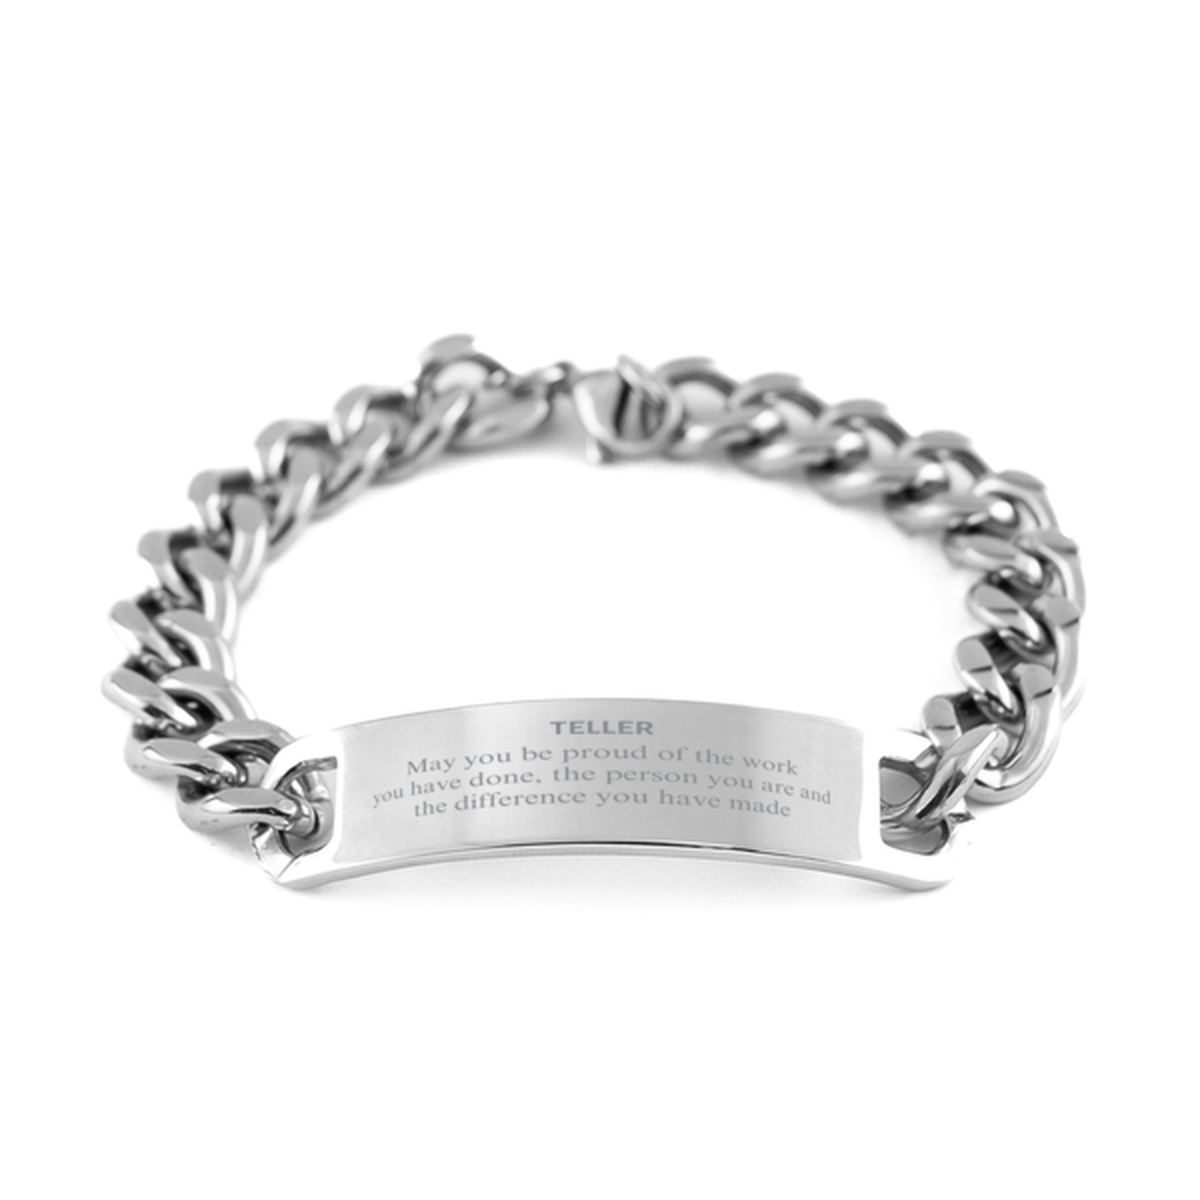 Teller May you be proud of the work you have done, Retirement Teller Cuban Chain Stainless Steel Bracelet for Colleague Appreciation Gifts Amazing for Teller